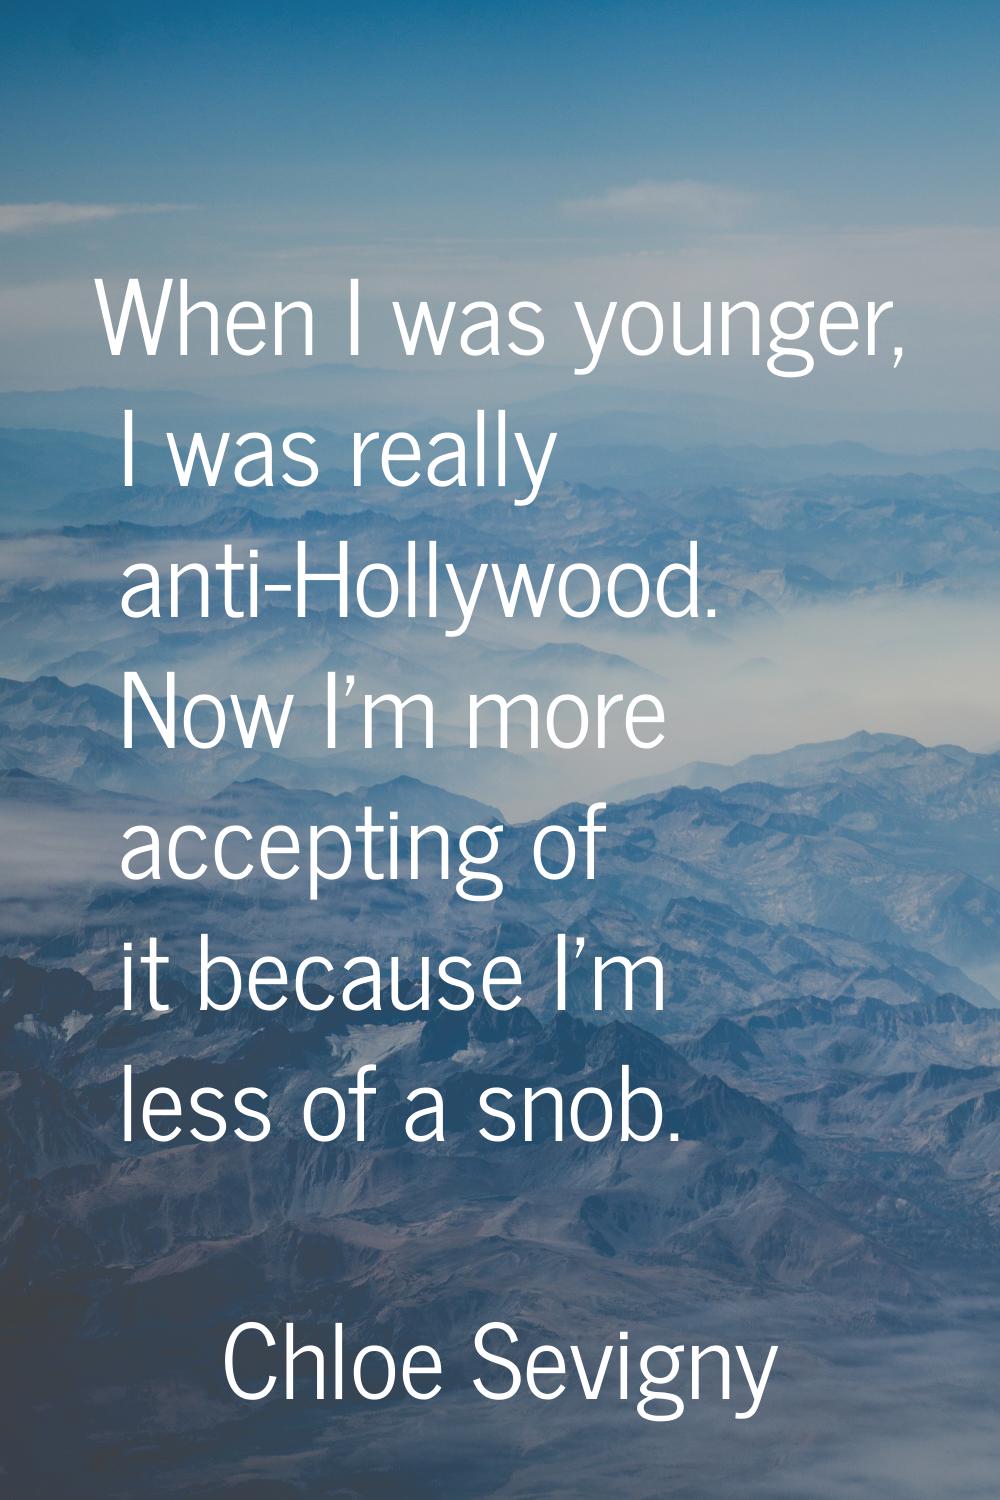 When I was younger, I was really anti-Hollywood. Now I'm more accepting of it because I'm less of a